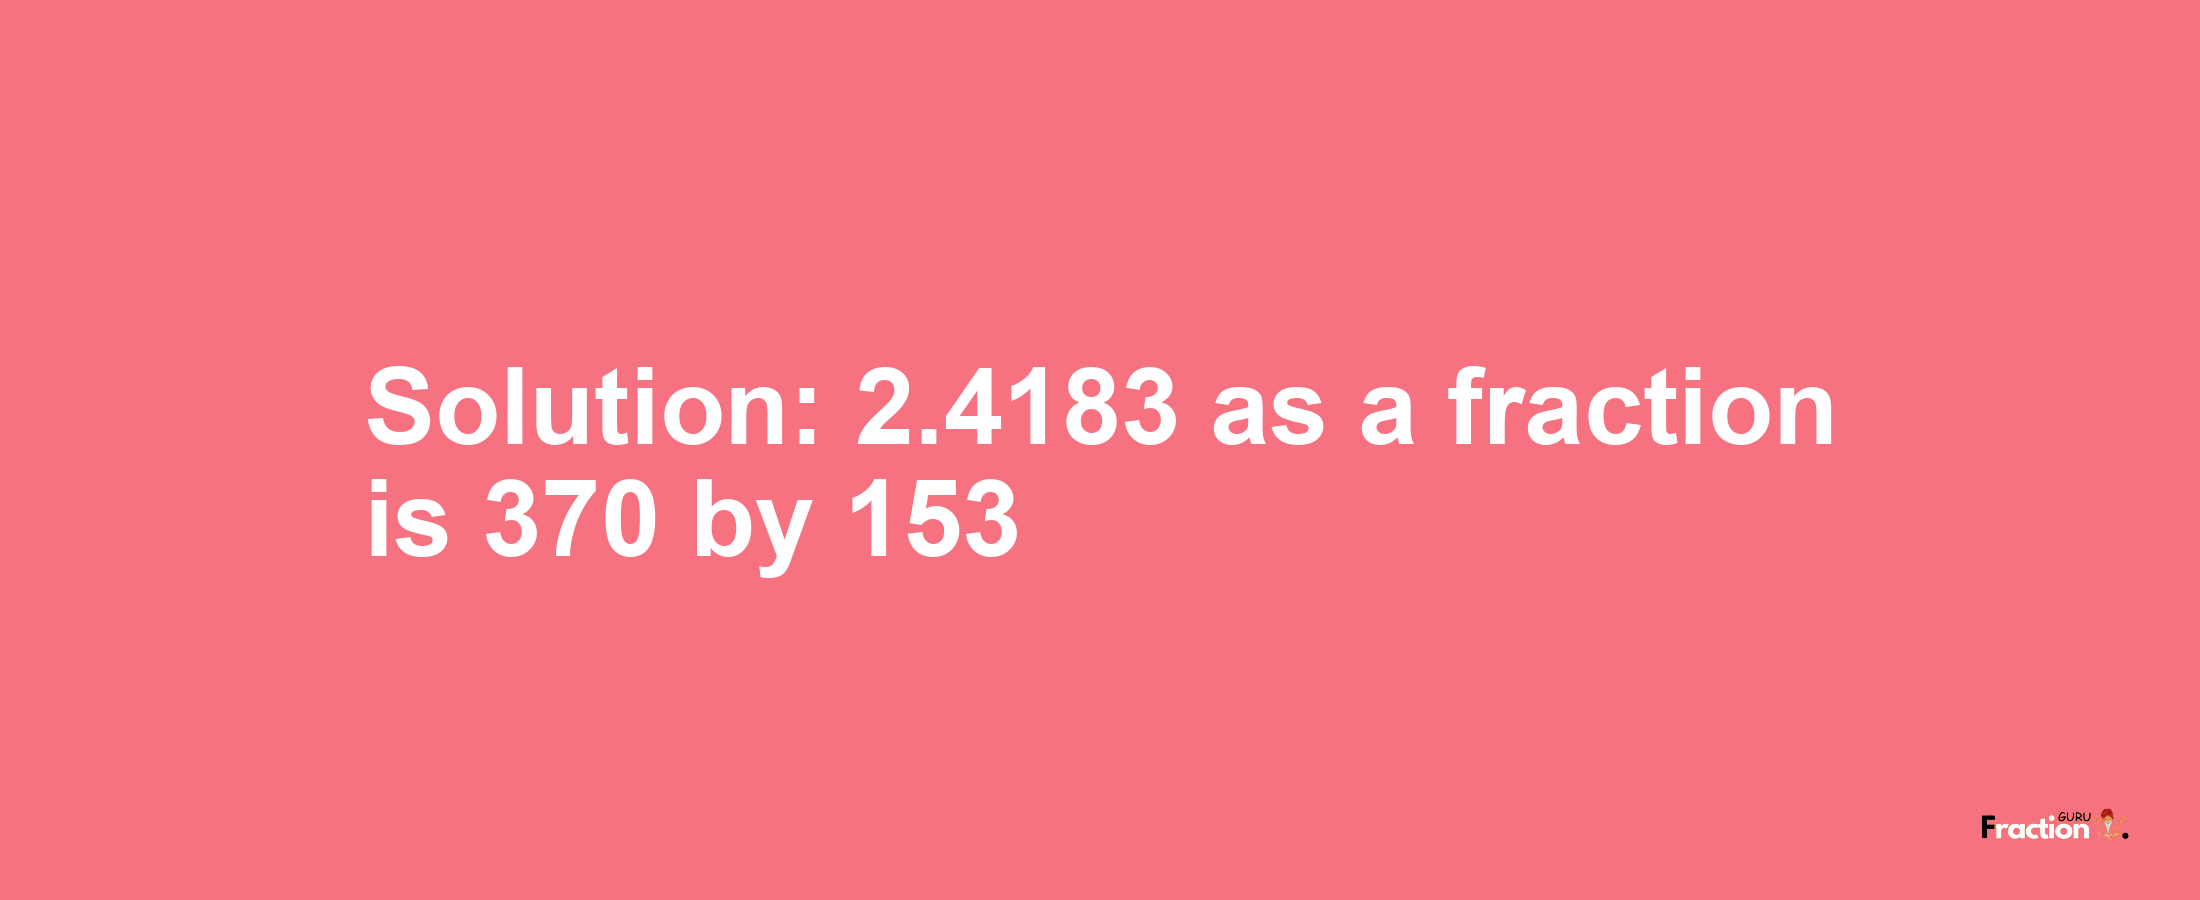 Solution:2.4183 as a fraction is 370/153